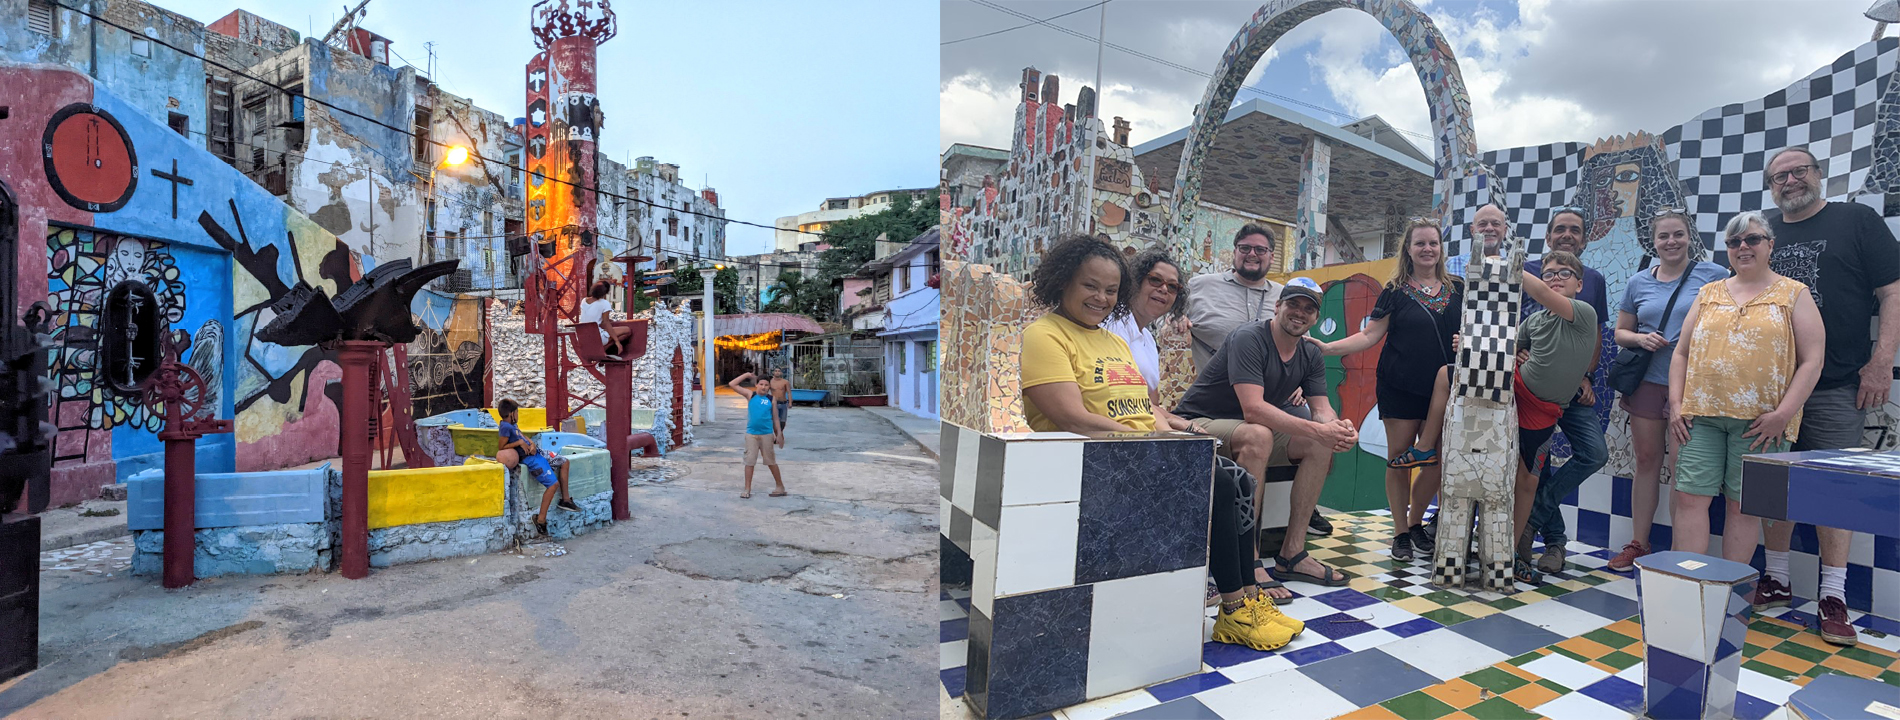 Image on the left features colorfully painted buildings and children playing in Cuba. On the right, members of the trip smile for the camera in Cuba.